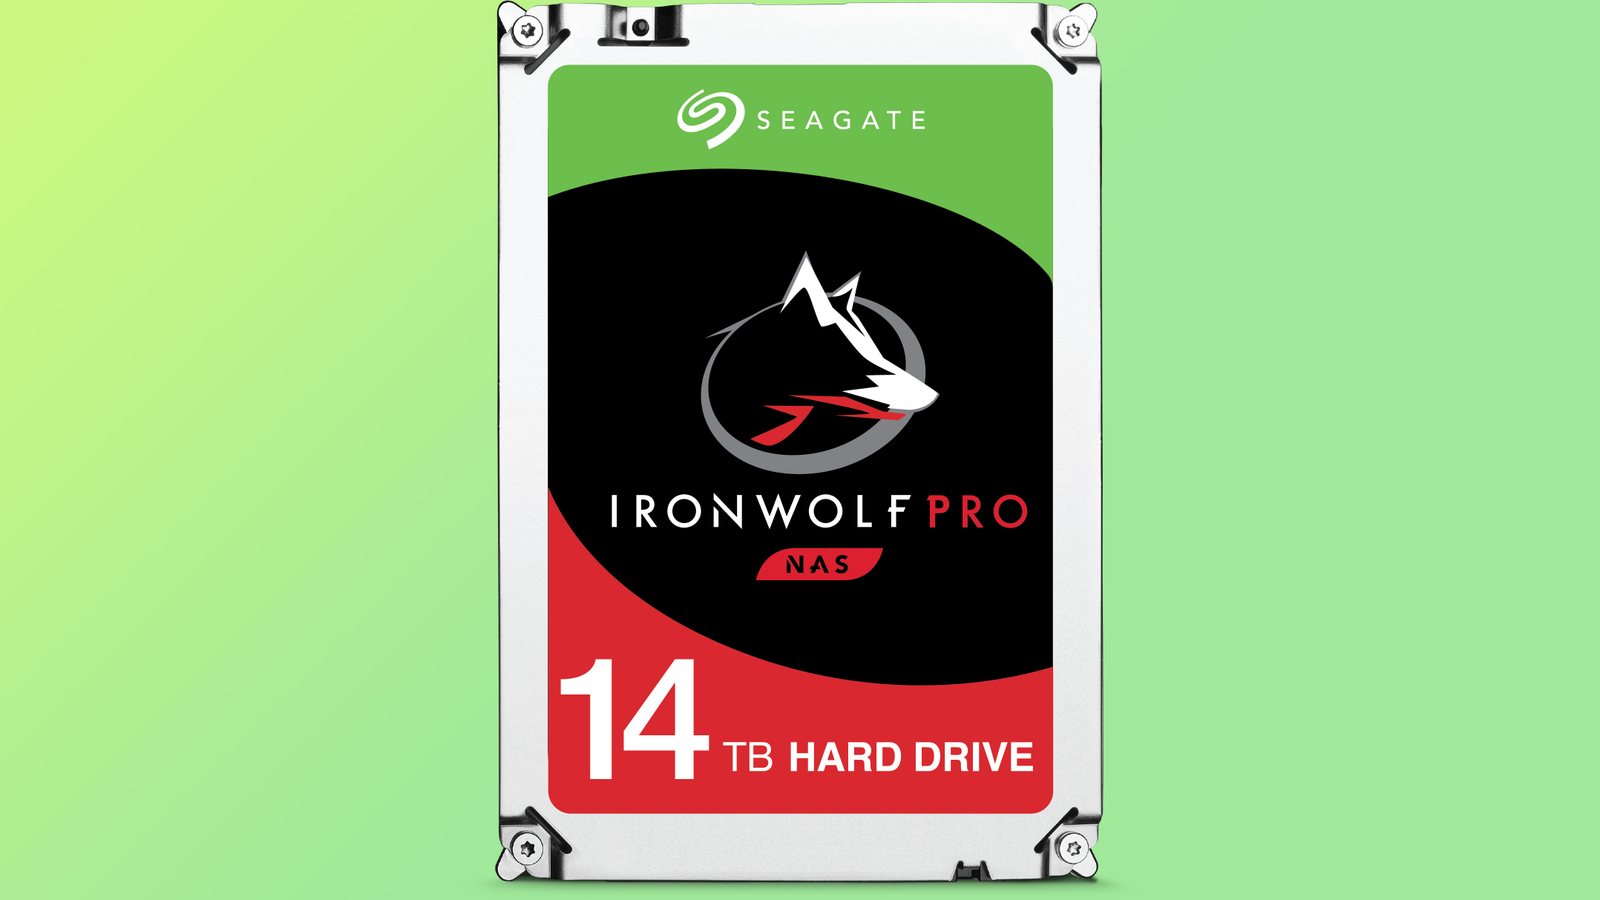 Seagate's massive 14TB IronWolf Pro hard drive is $150 off today